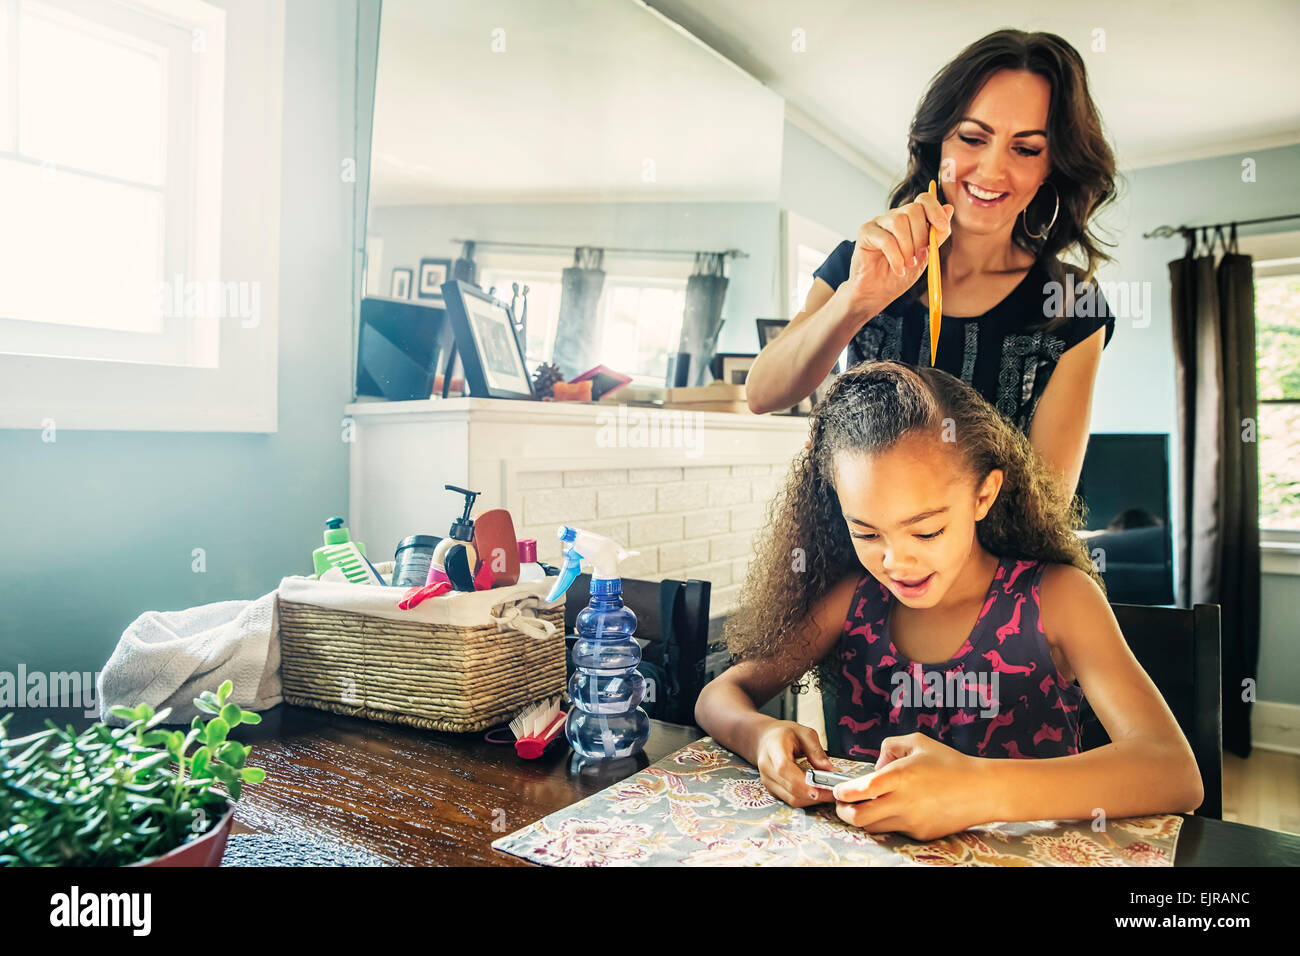 Mother combing hair of daughter at kitchen table Stock Photo